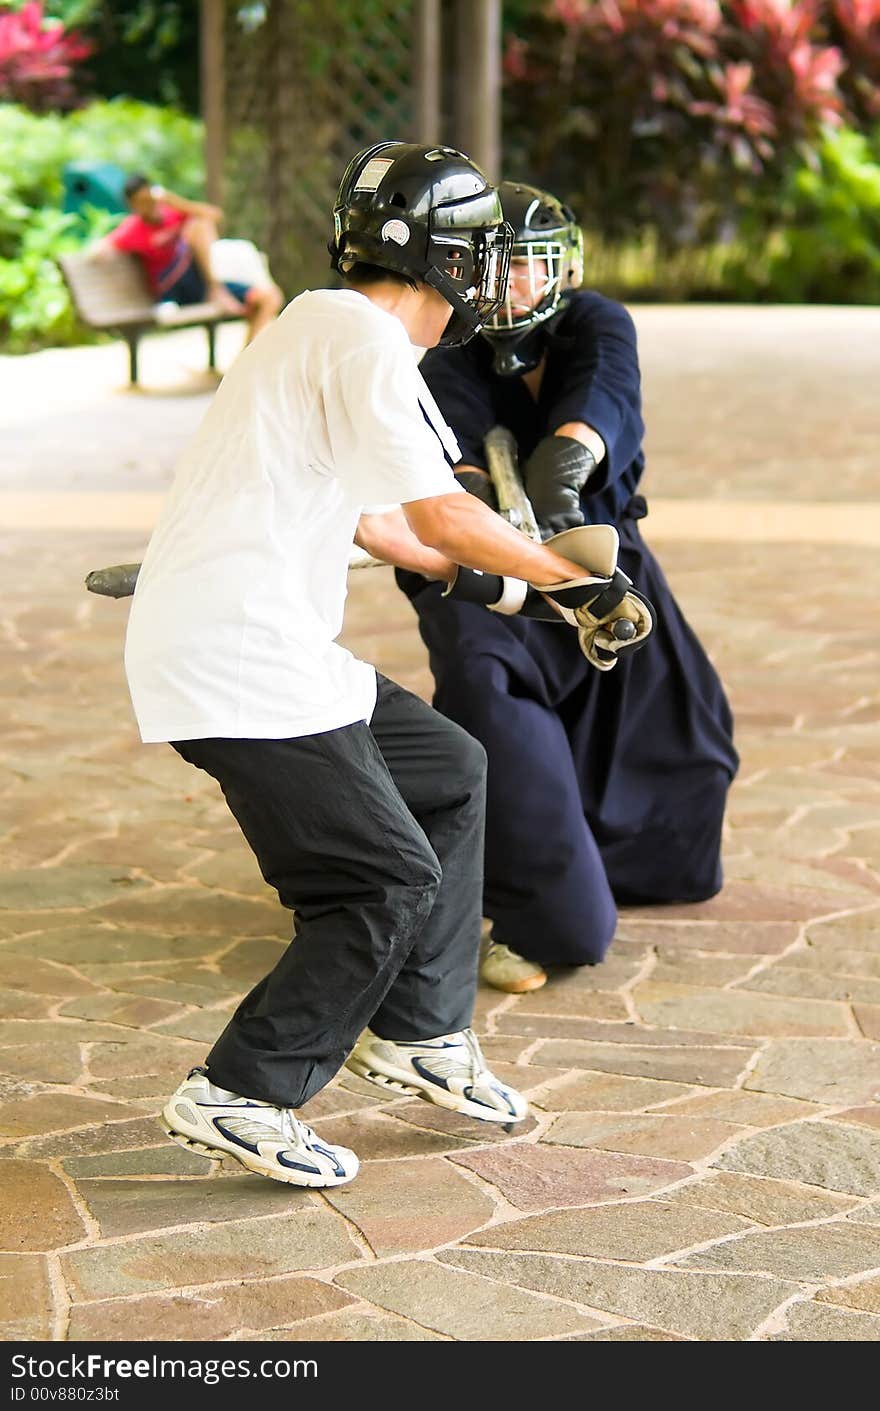 Free weapon fighting enthusiasts, a lance versus a sword and shield, sparring in an open shaded public space on a weekend. Free weapon fighting enthusiasts, a lance versus a sword and shield, sparring in an open shaded public space on a weekend